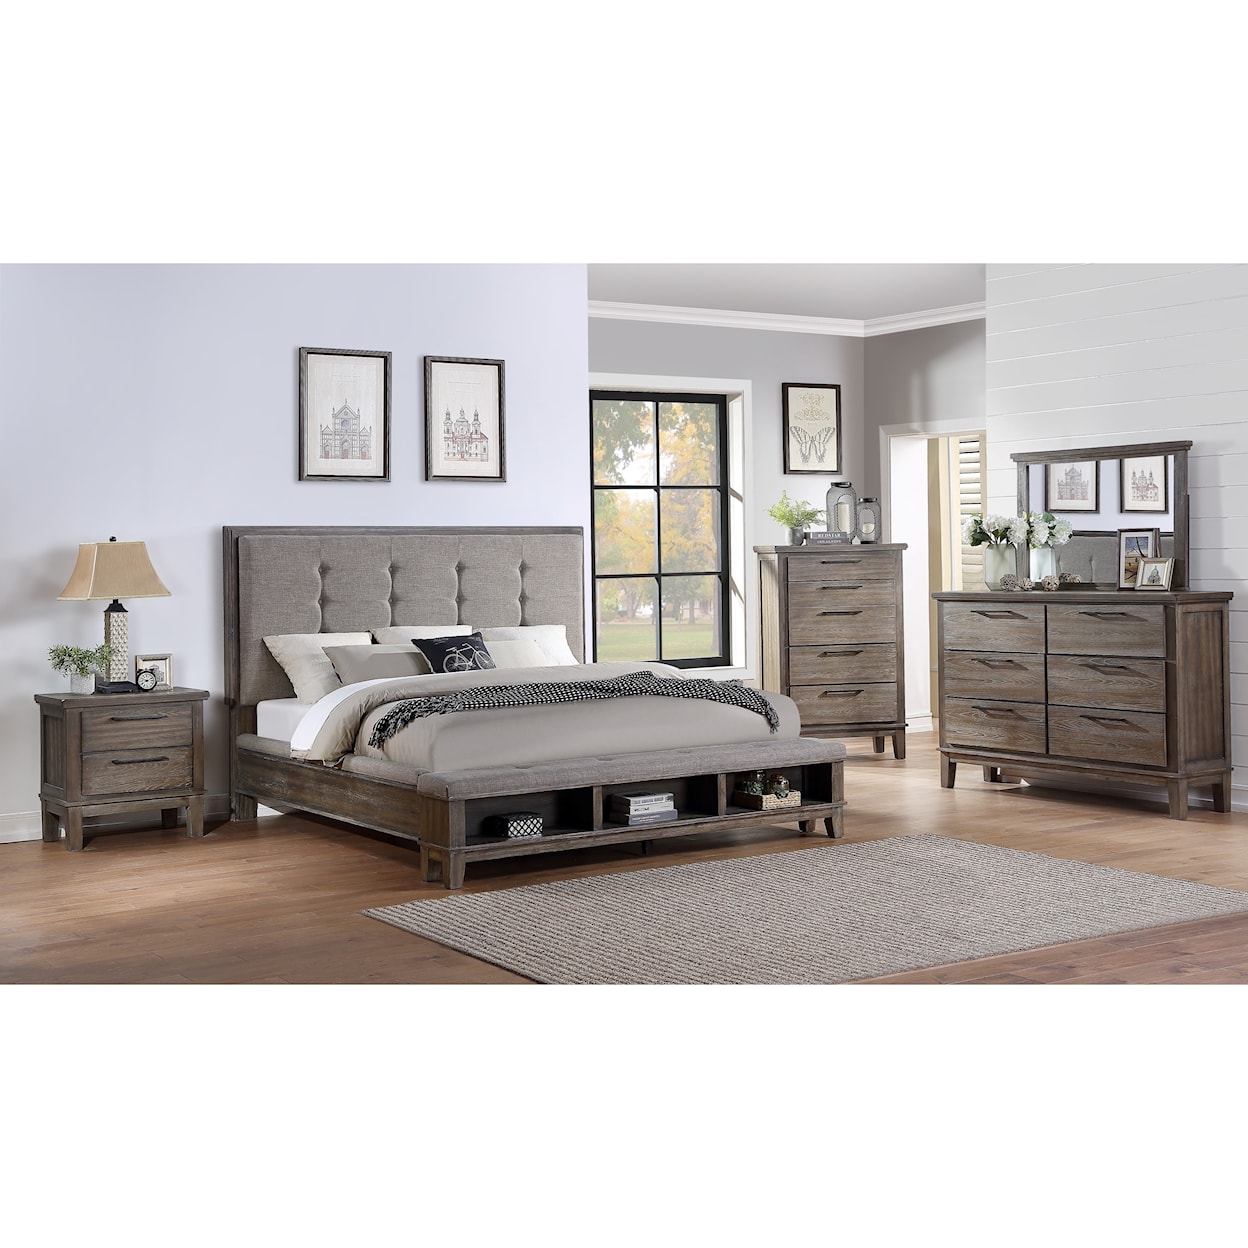 New Classic Cagney 7PC King Bedroom Group